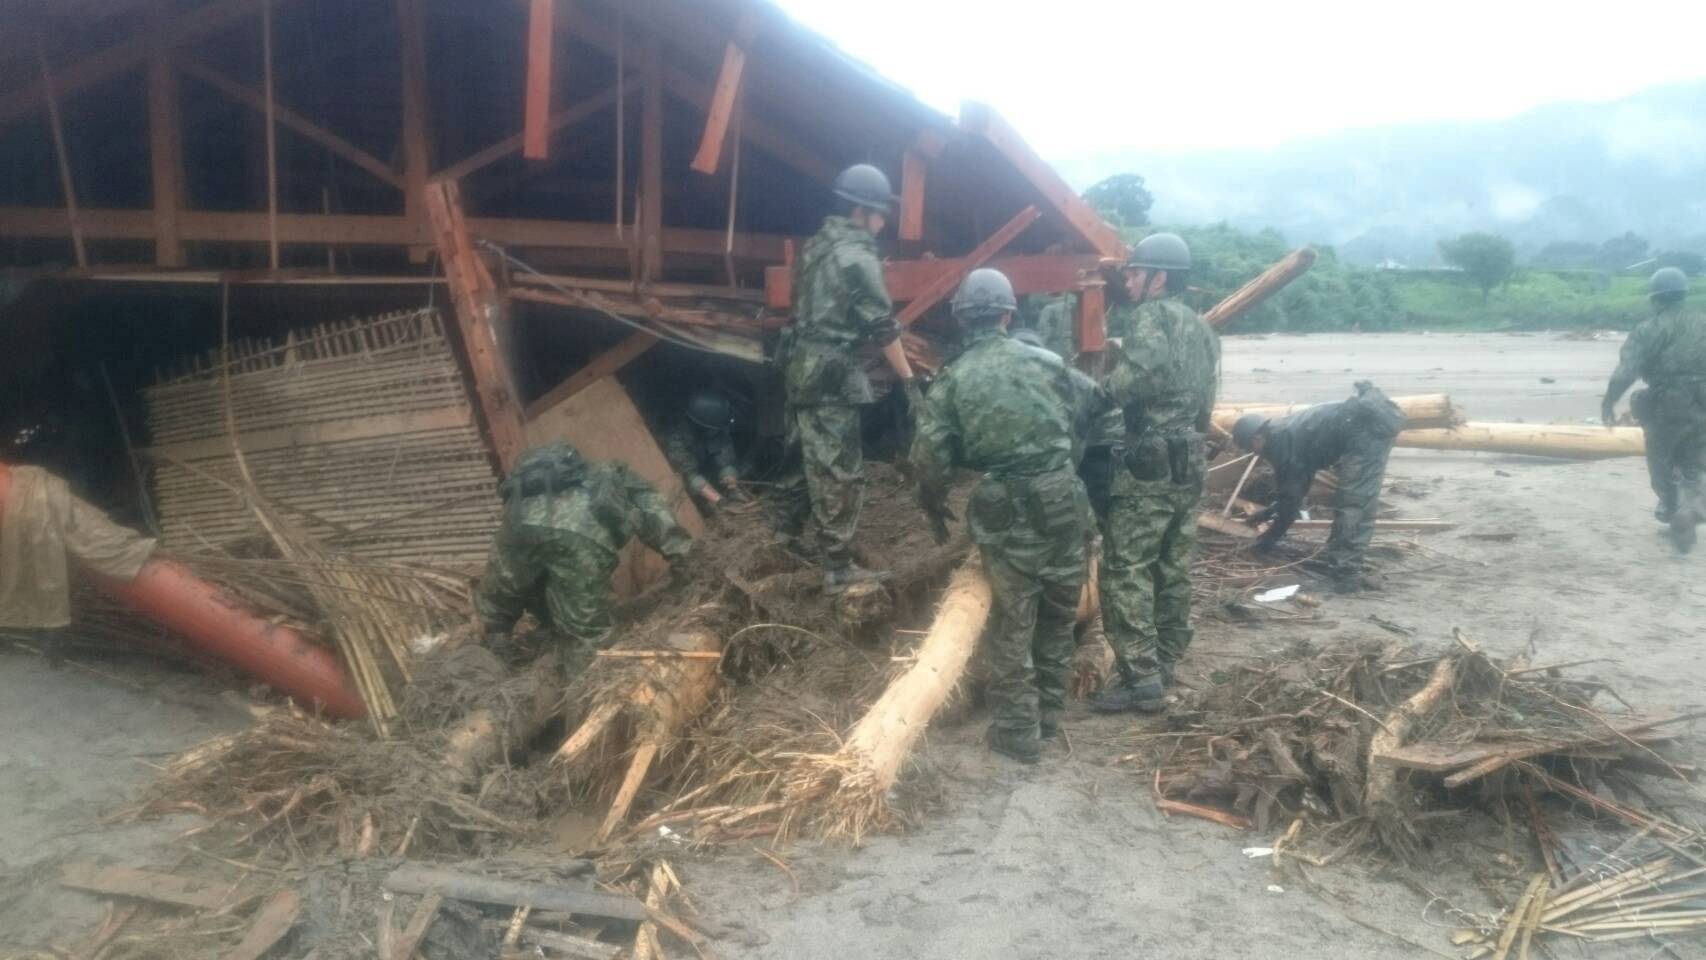 JSDF soldiers conduct rescue operations after heavy rain hit the area in Asakura